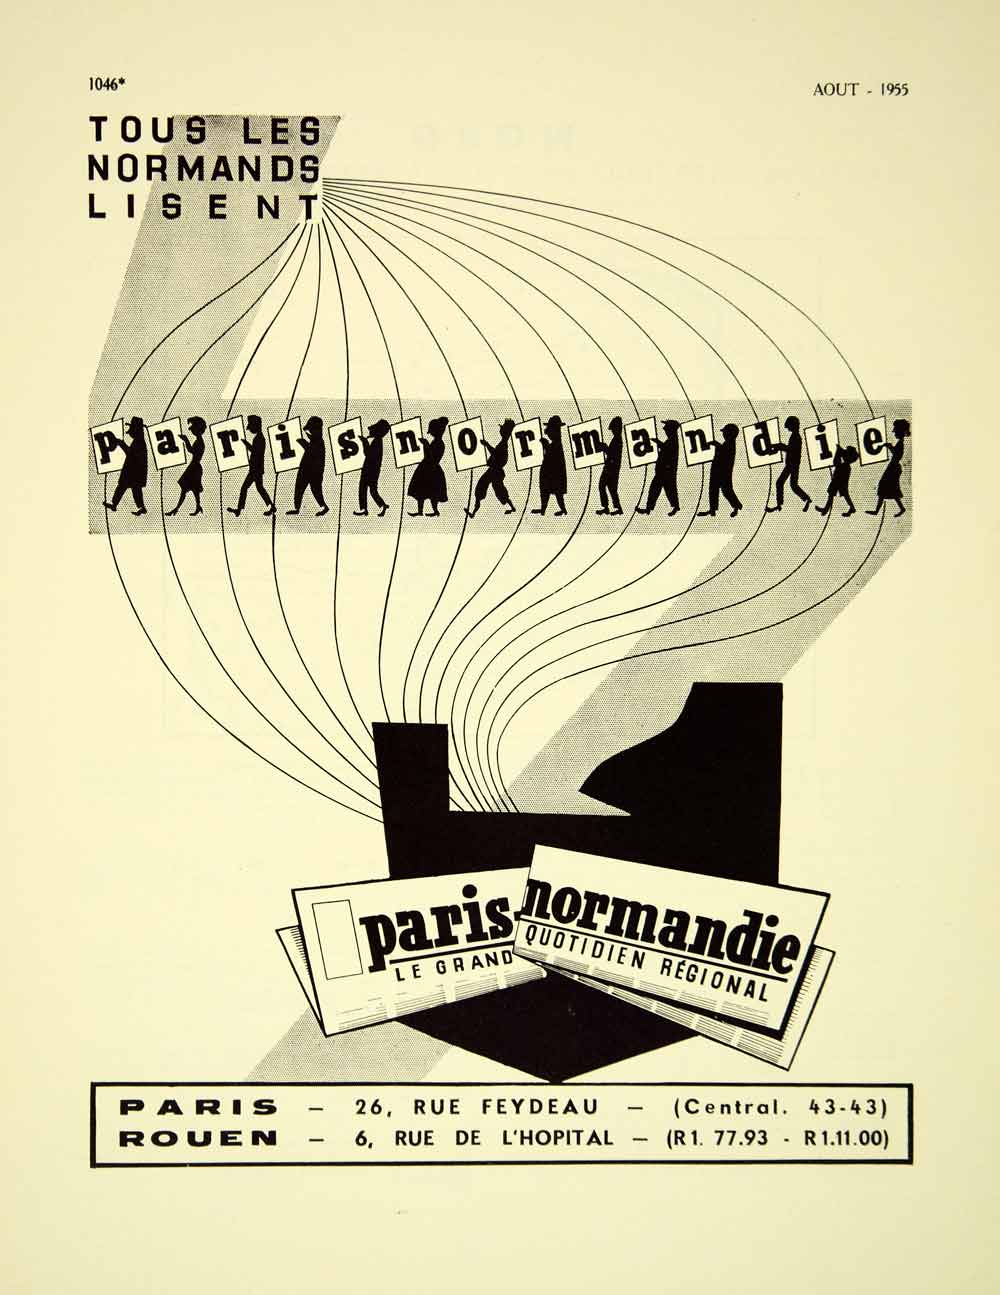 1955 Lithograph Vintage Ad Paris Normandie French Newspaper Daily Regional VENA4